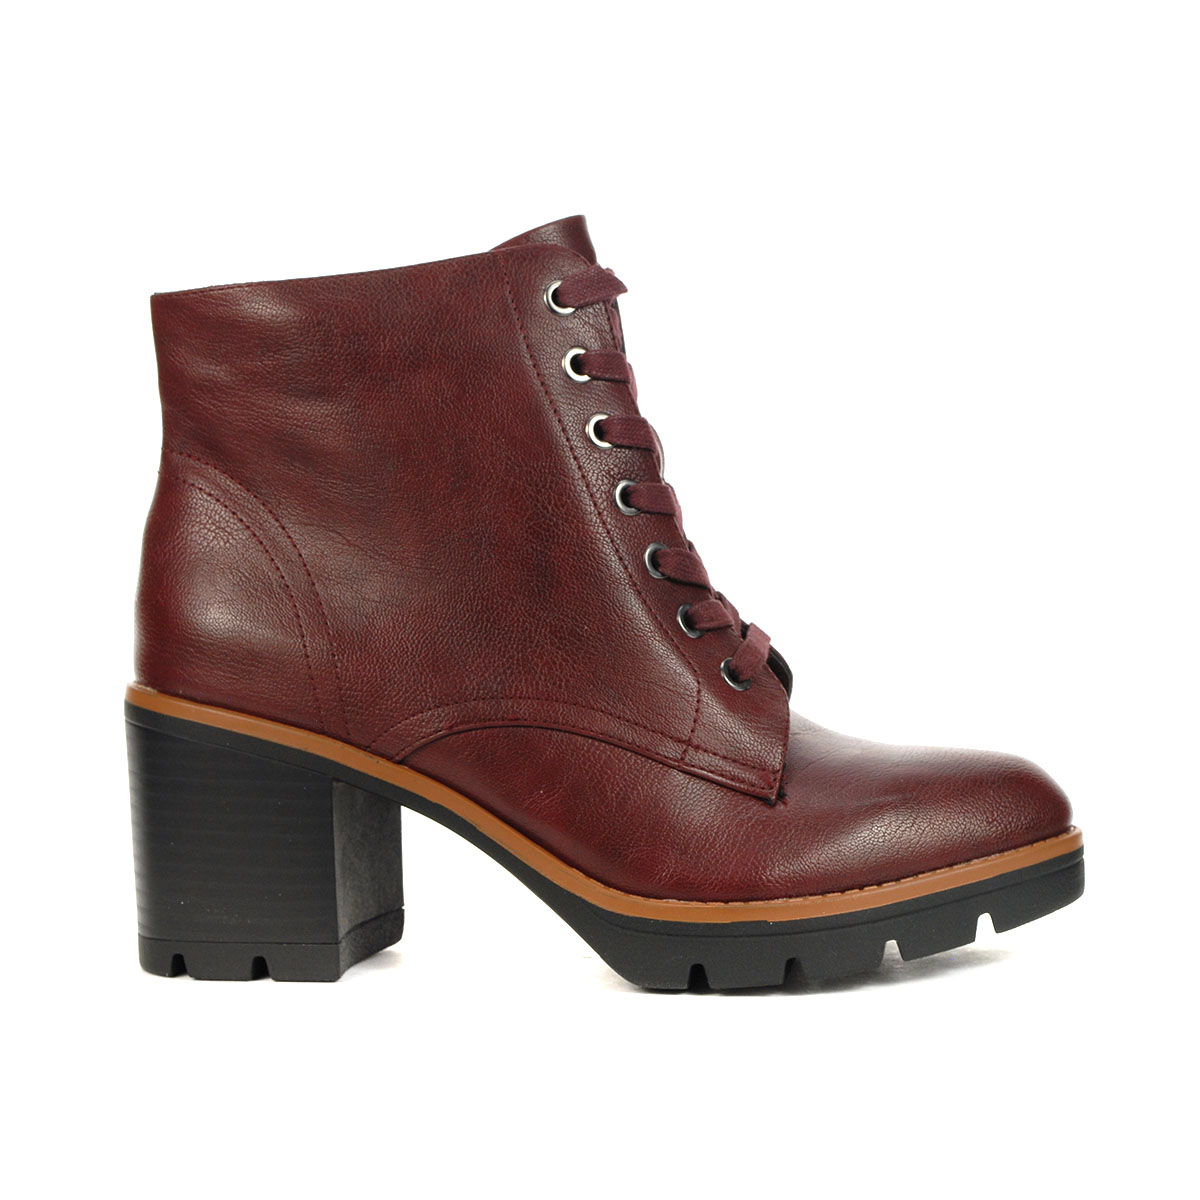 Naturalizer Madalynn Bordeaux Heeled Ankle Booties